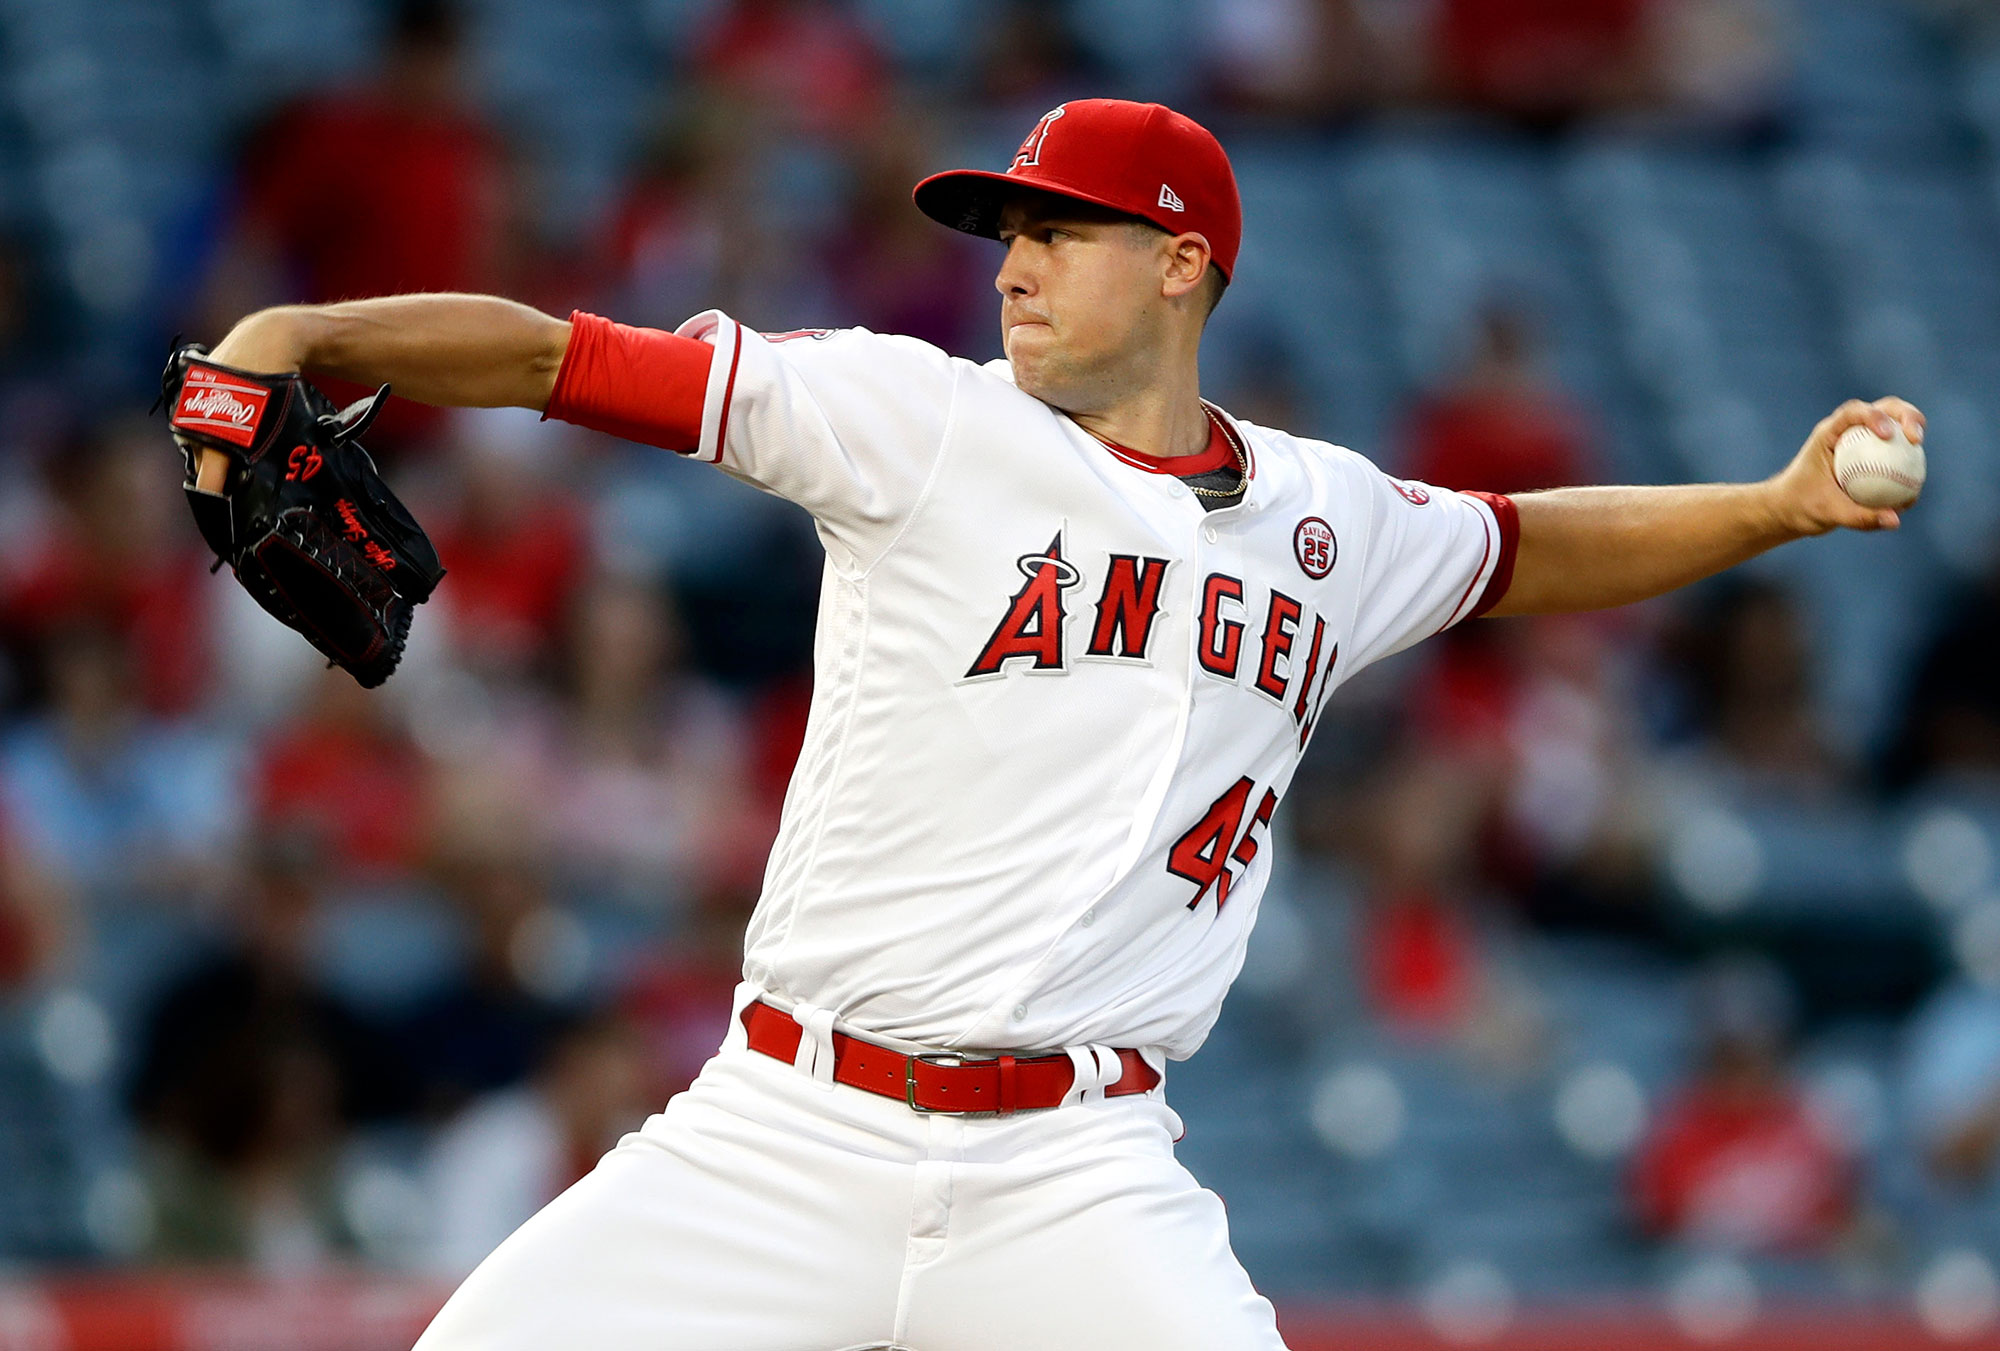 Coroner: Angels pitcher Skaggs died of accidental overdose